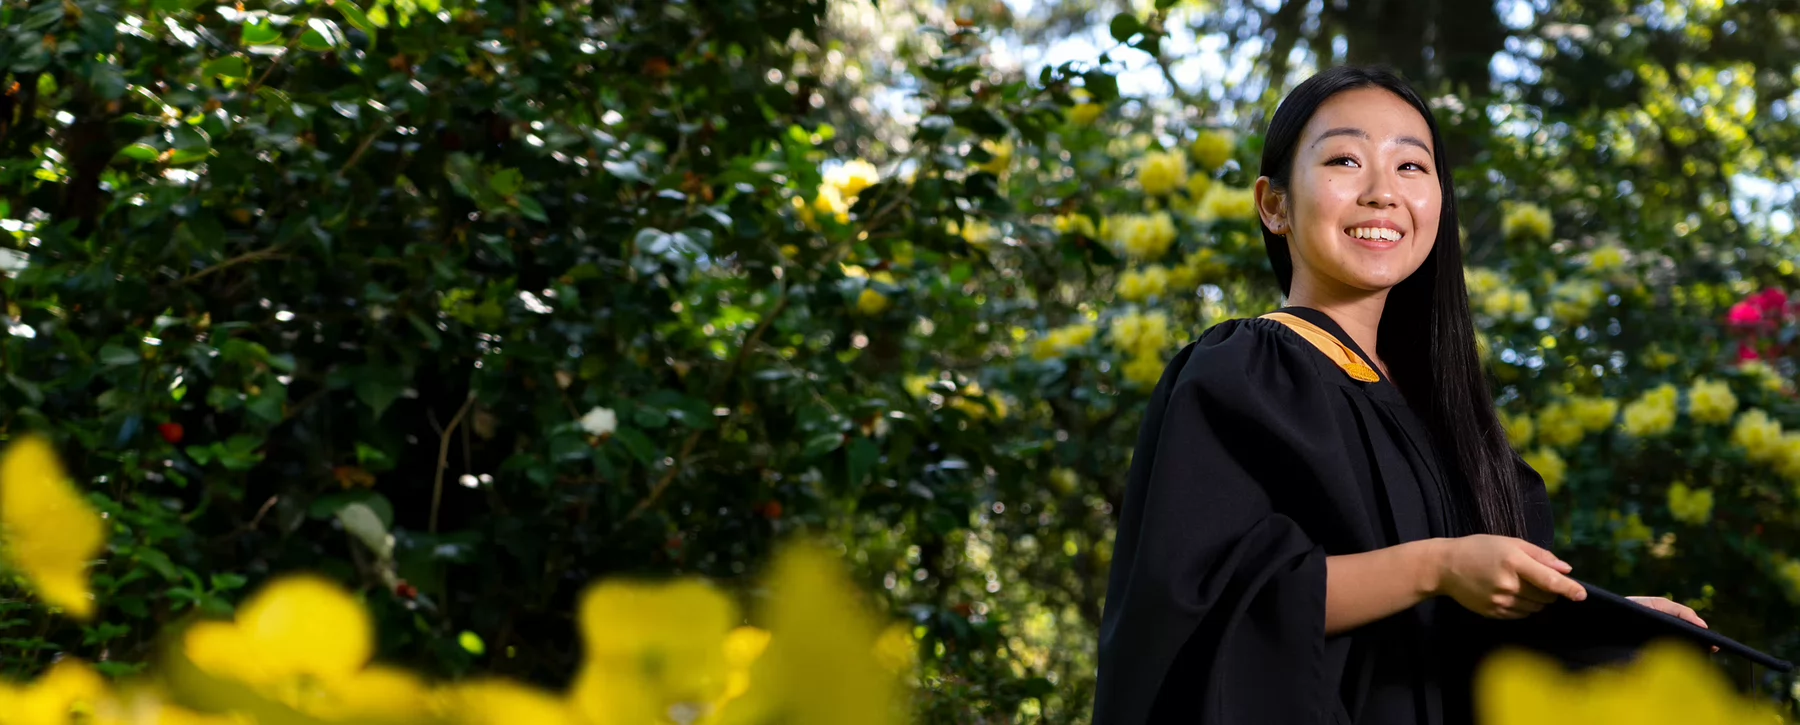 Young asian woman in graduation cap and gown smiling in a park with lush greenery and flowers.